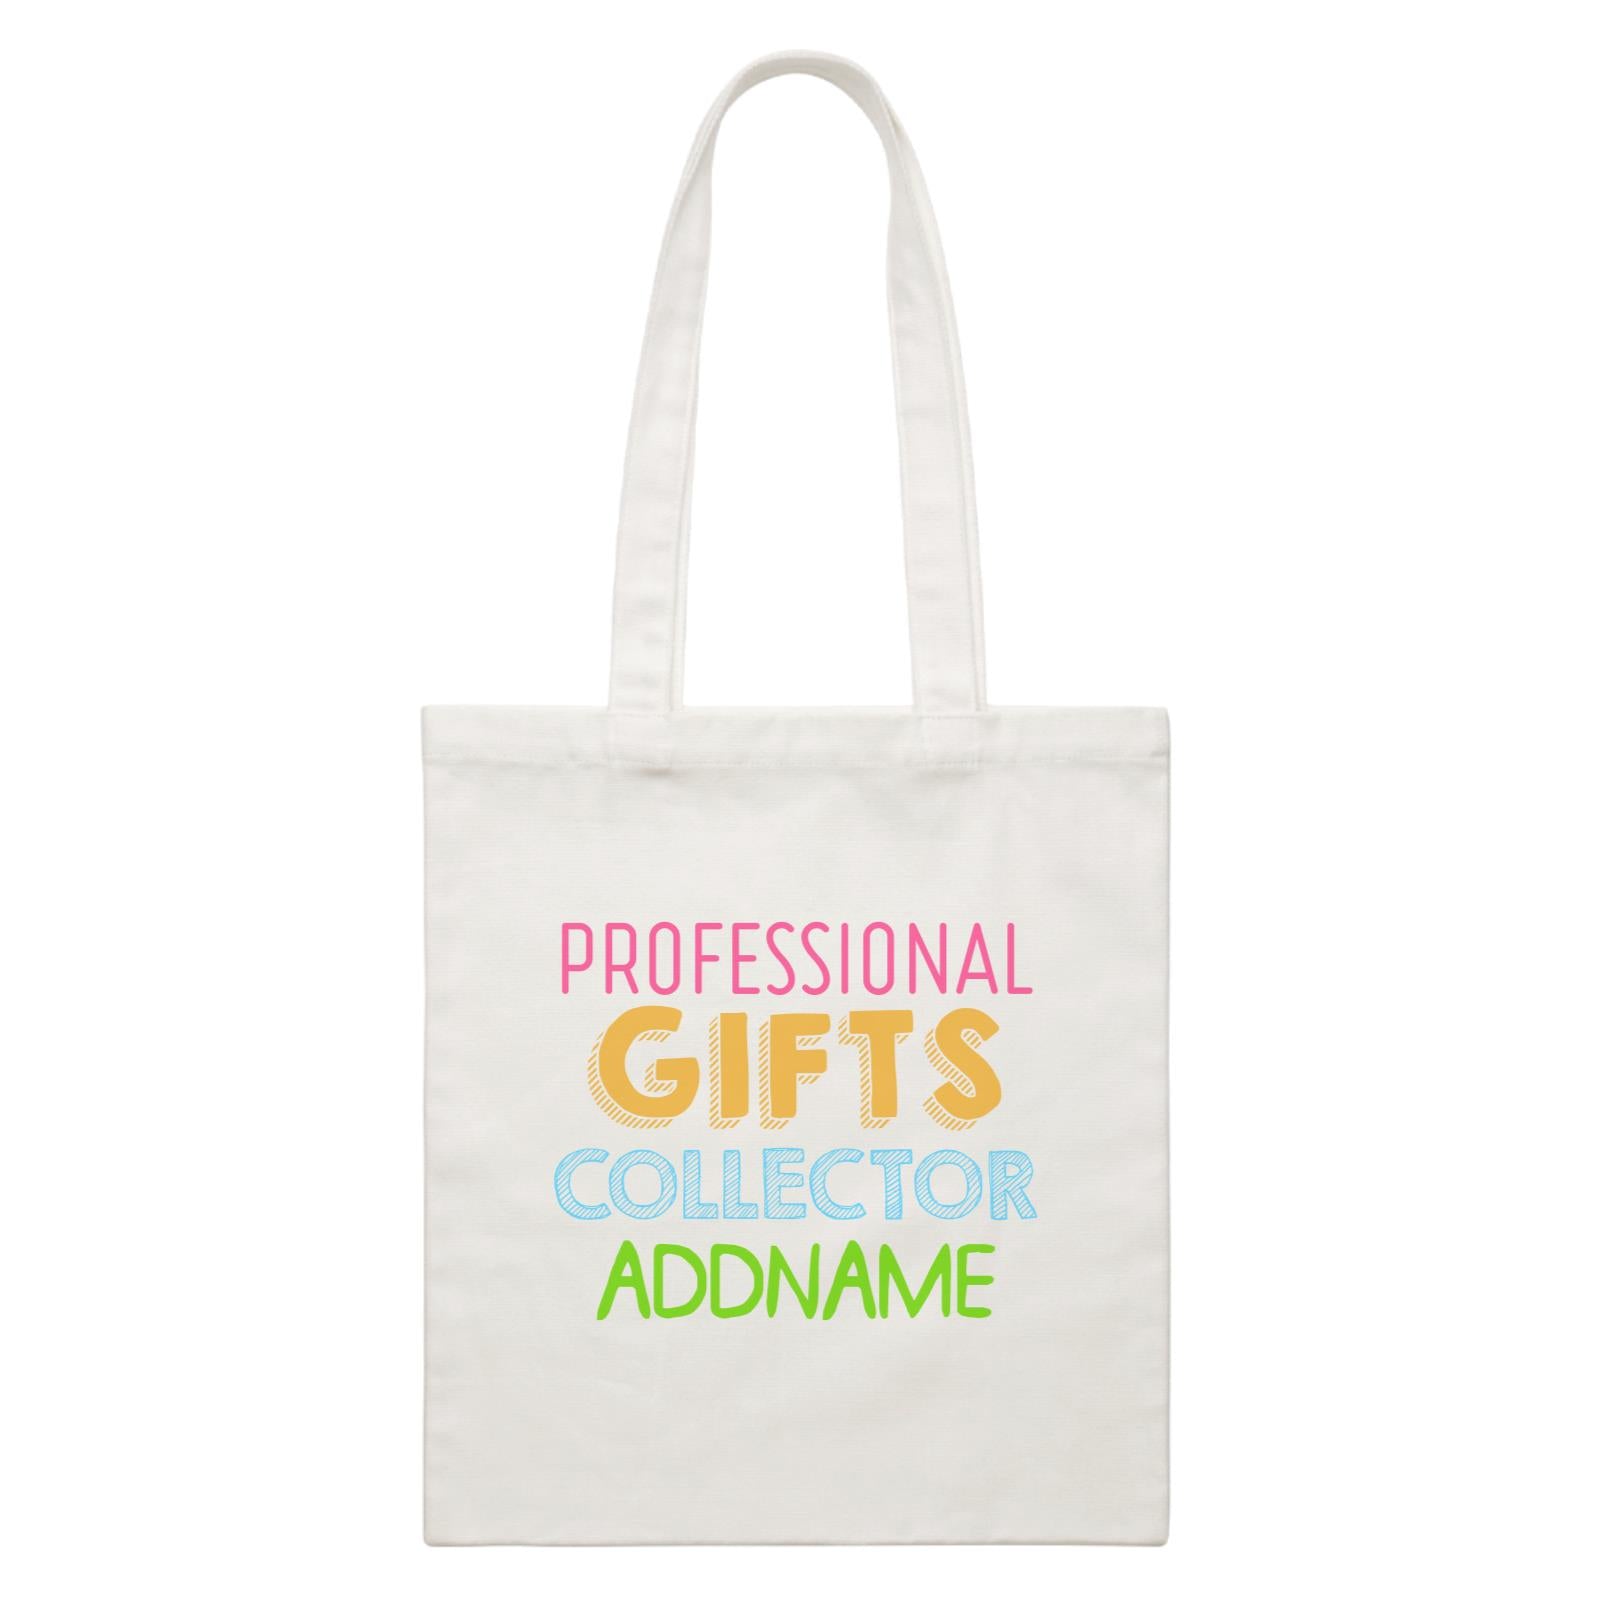 Professional Gifts Collector Addname White Canvas Bag